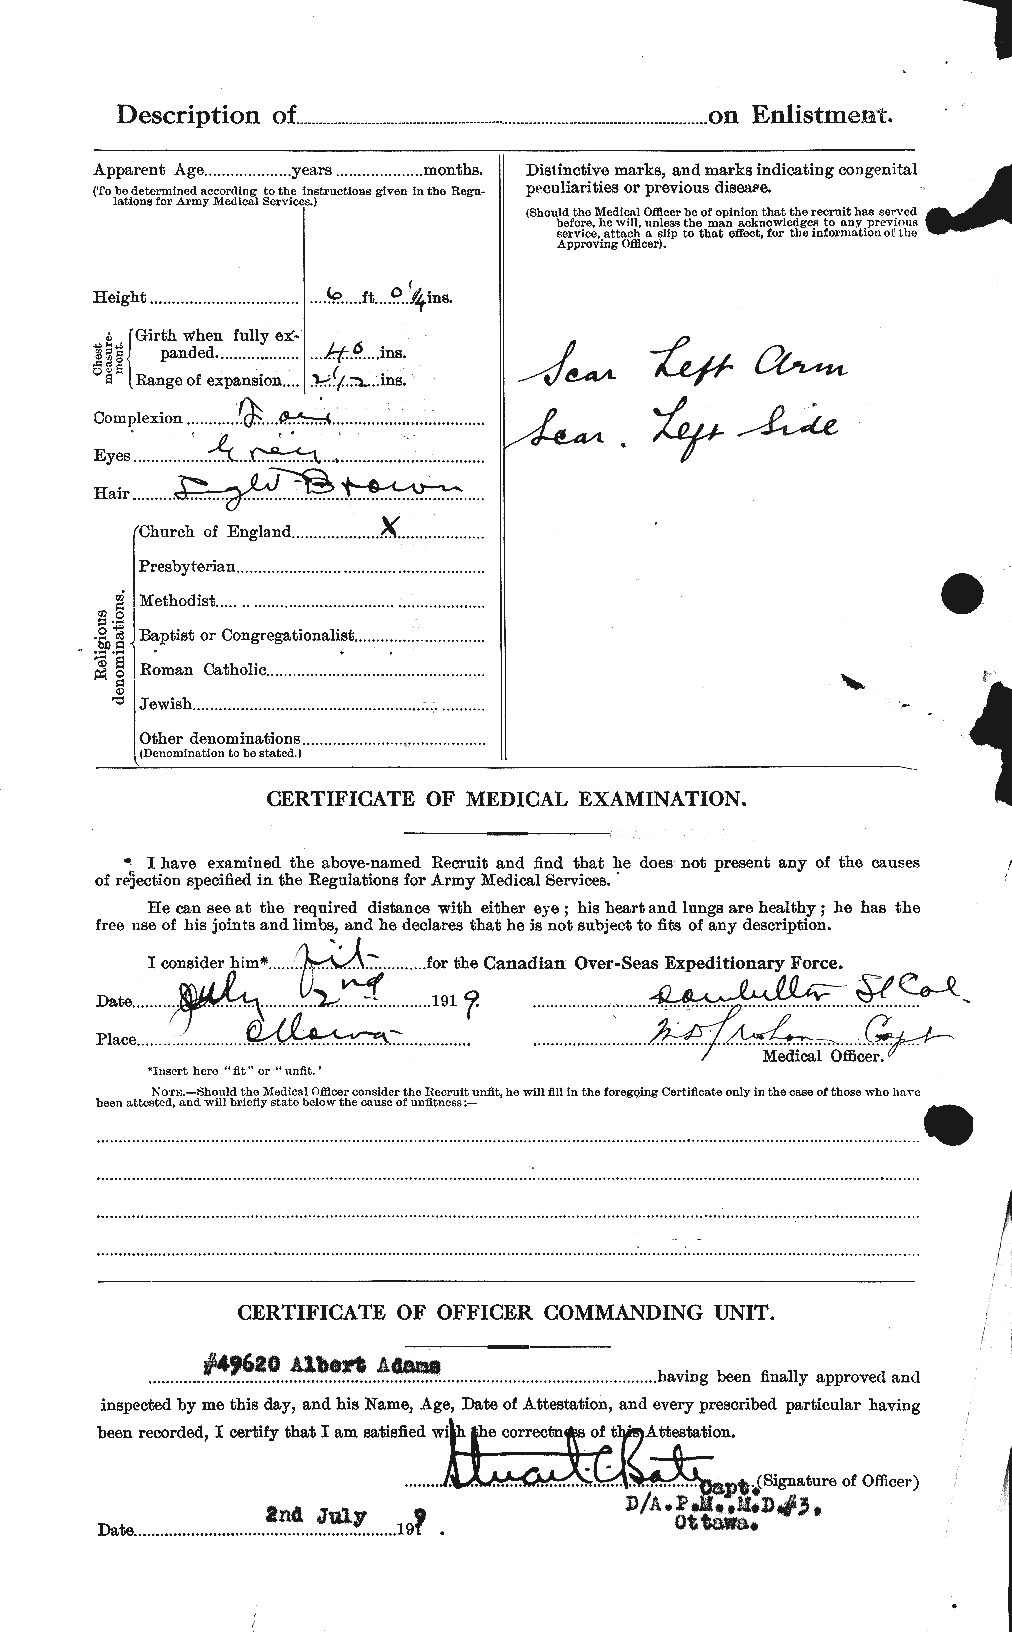 Personnel Records of the First World War - CEF 690897b